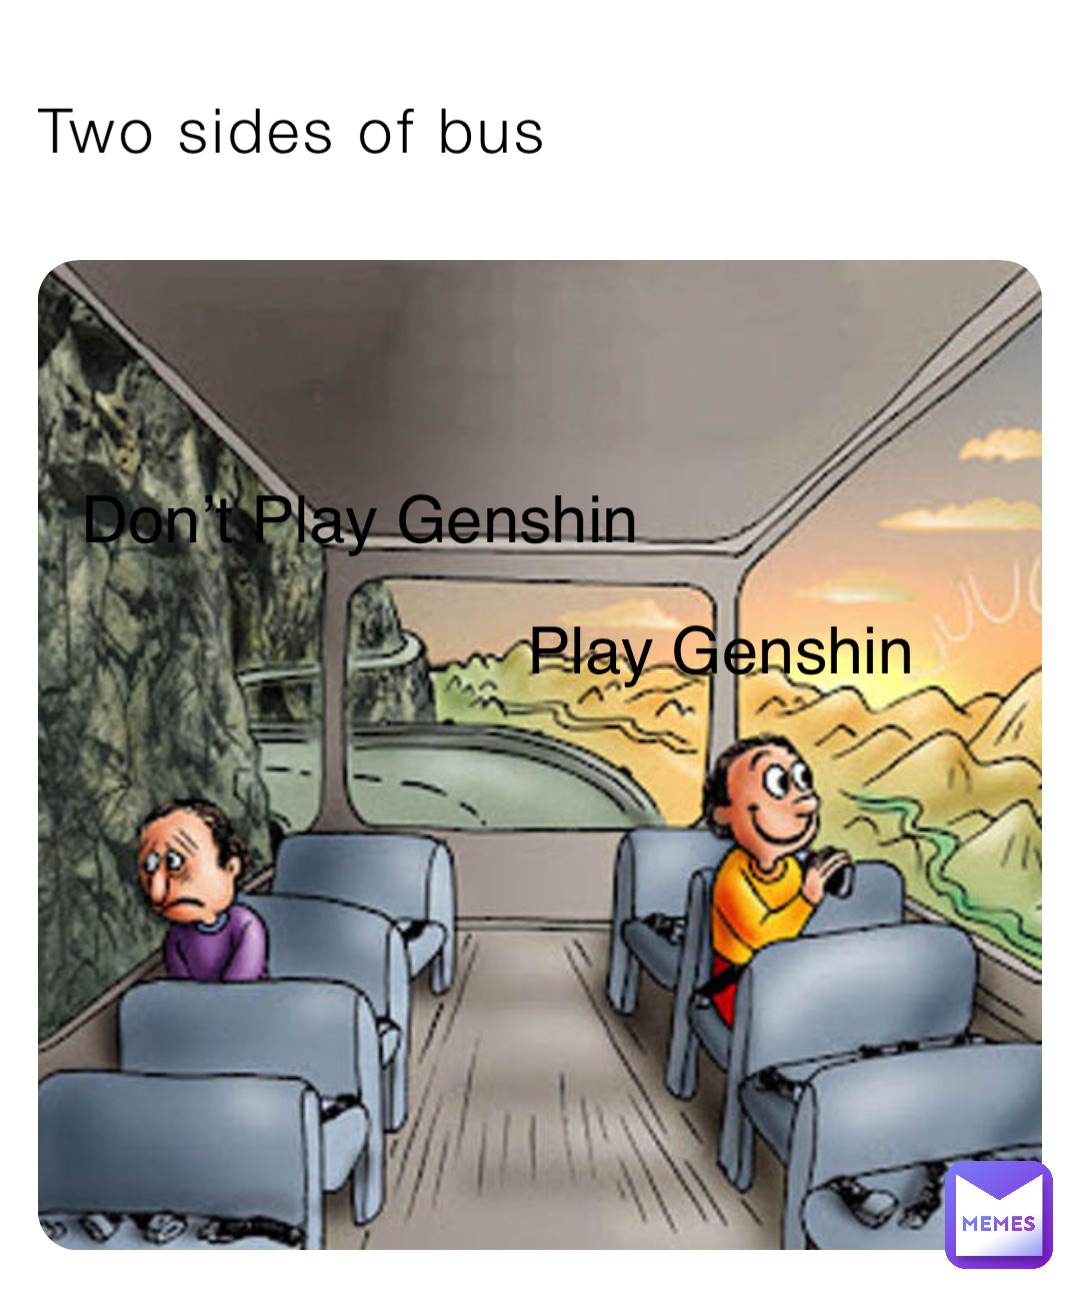 Two sides of bus Play Genshin Don’t Play Genshin